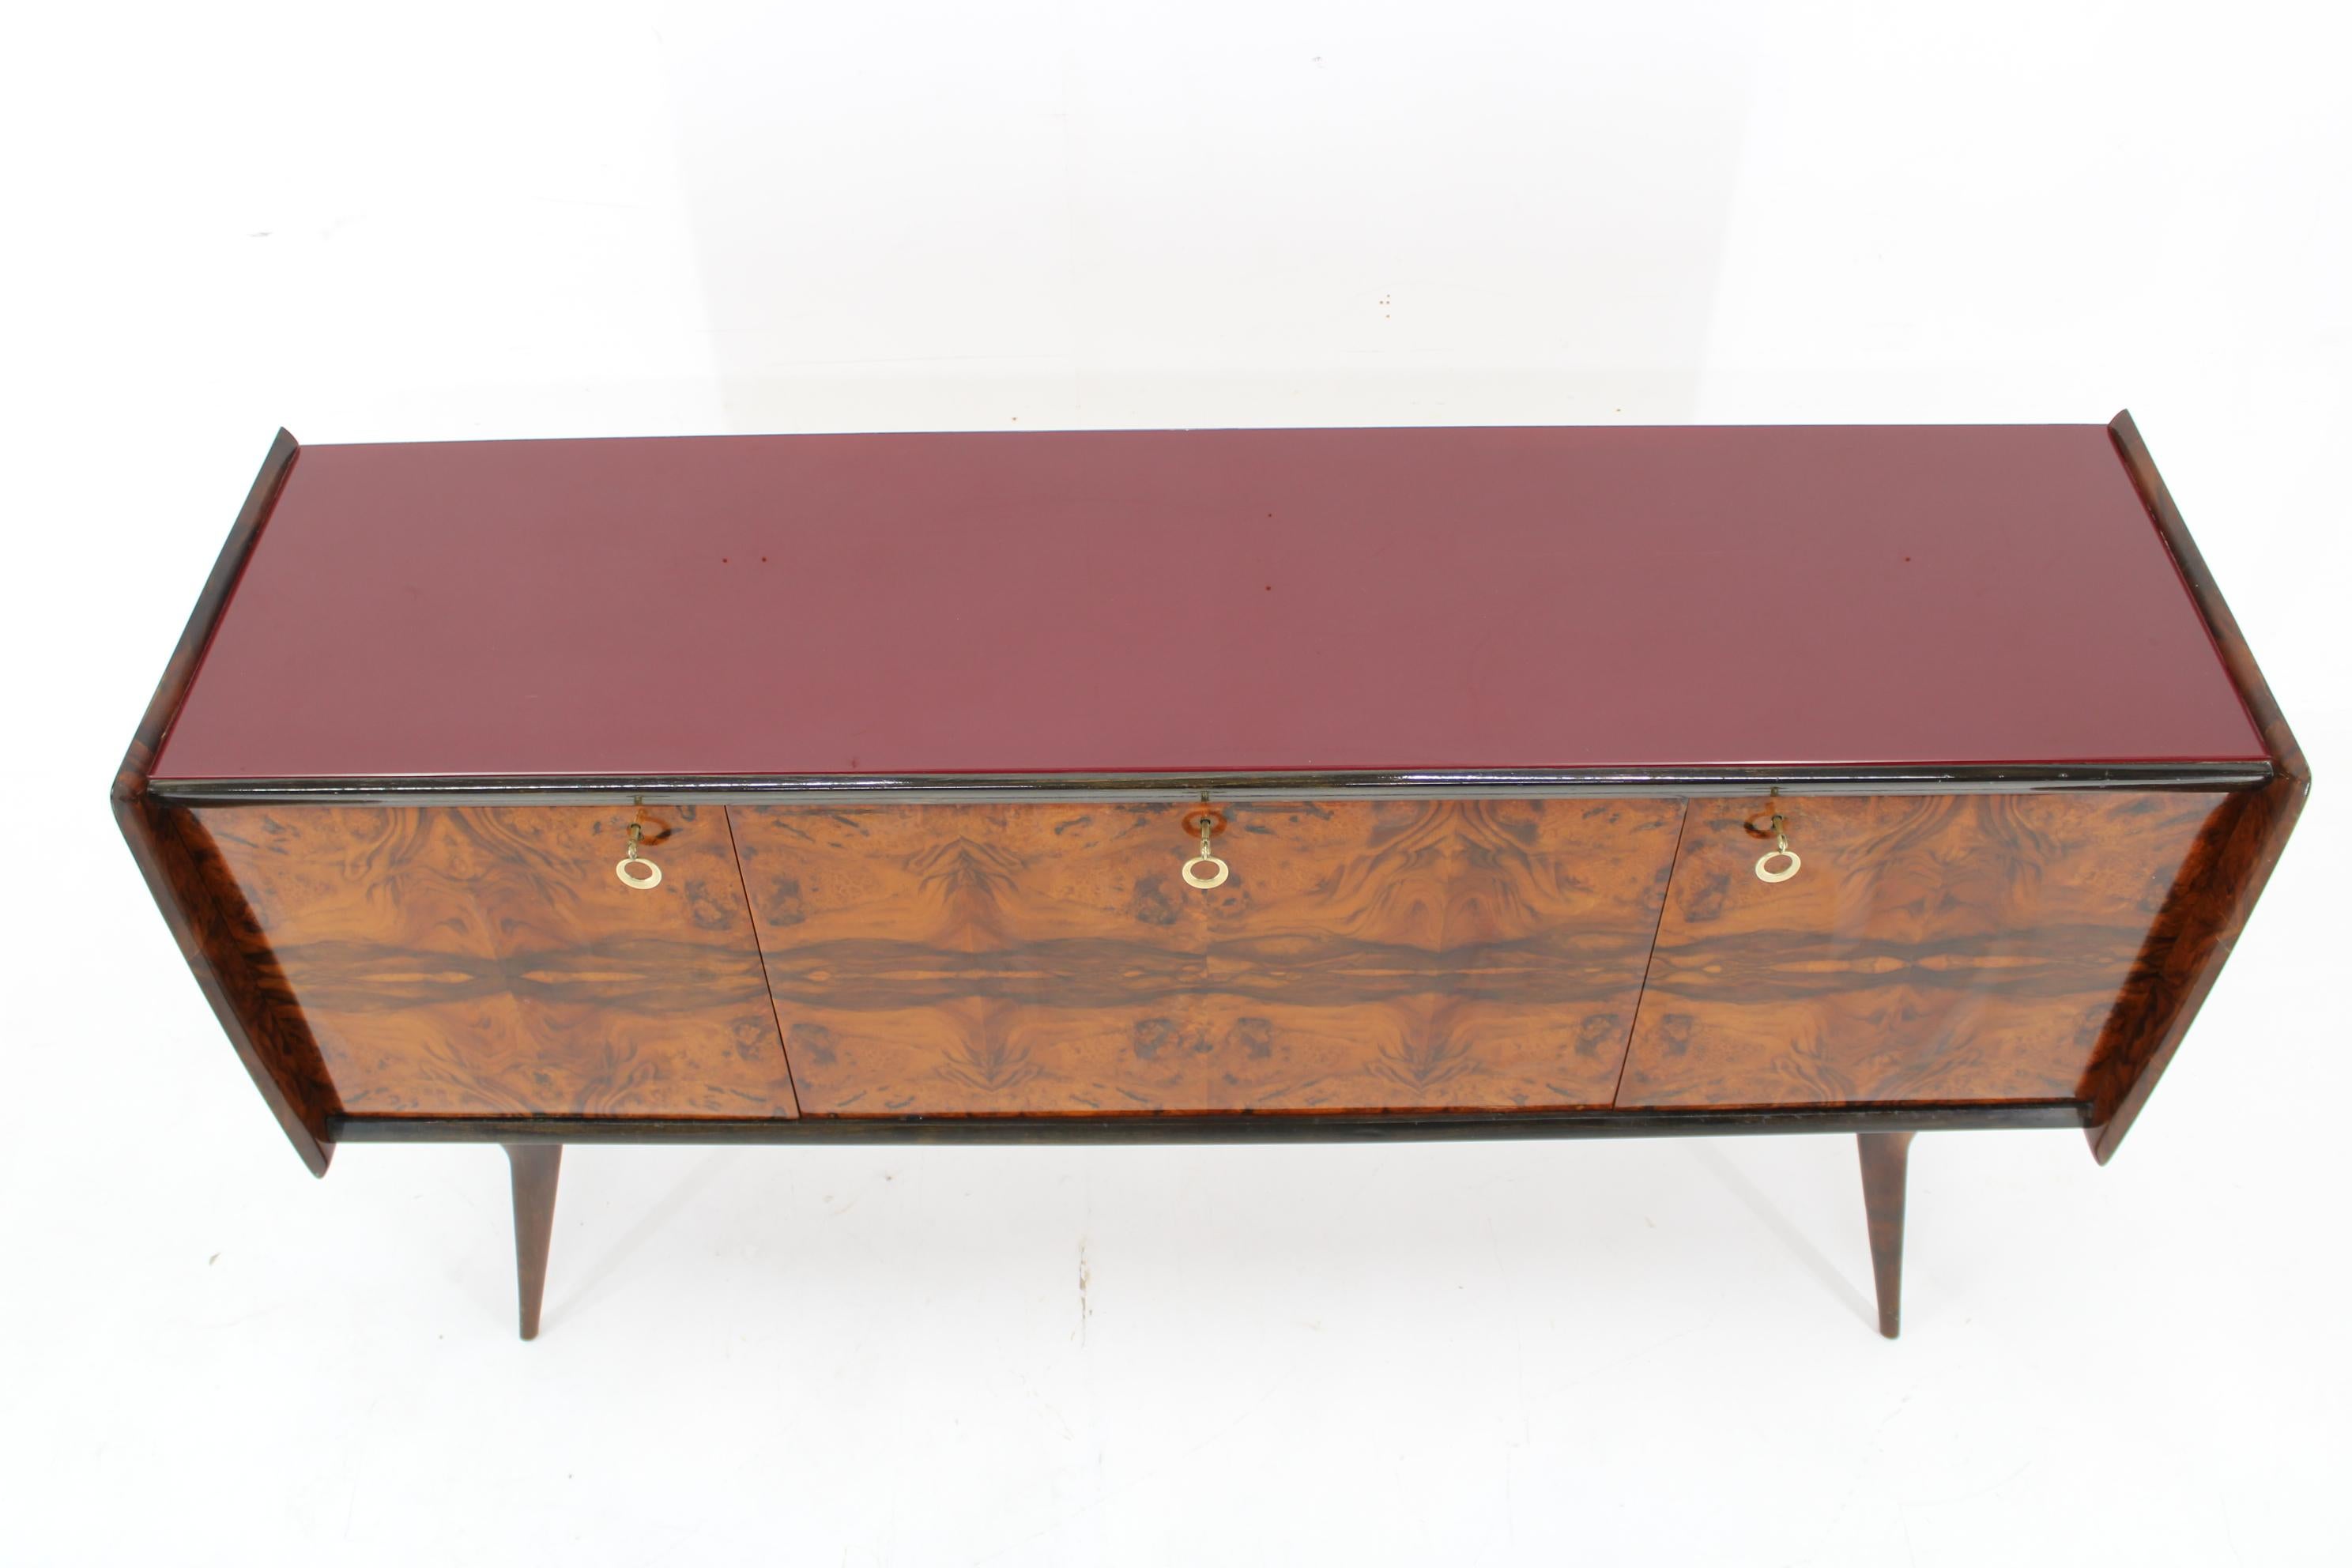 1950s Italian Sideboard with Walnut Veneer in High Gloss Finish In Good Condition For Sale In Praha, CZ